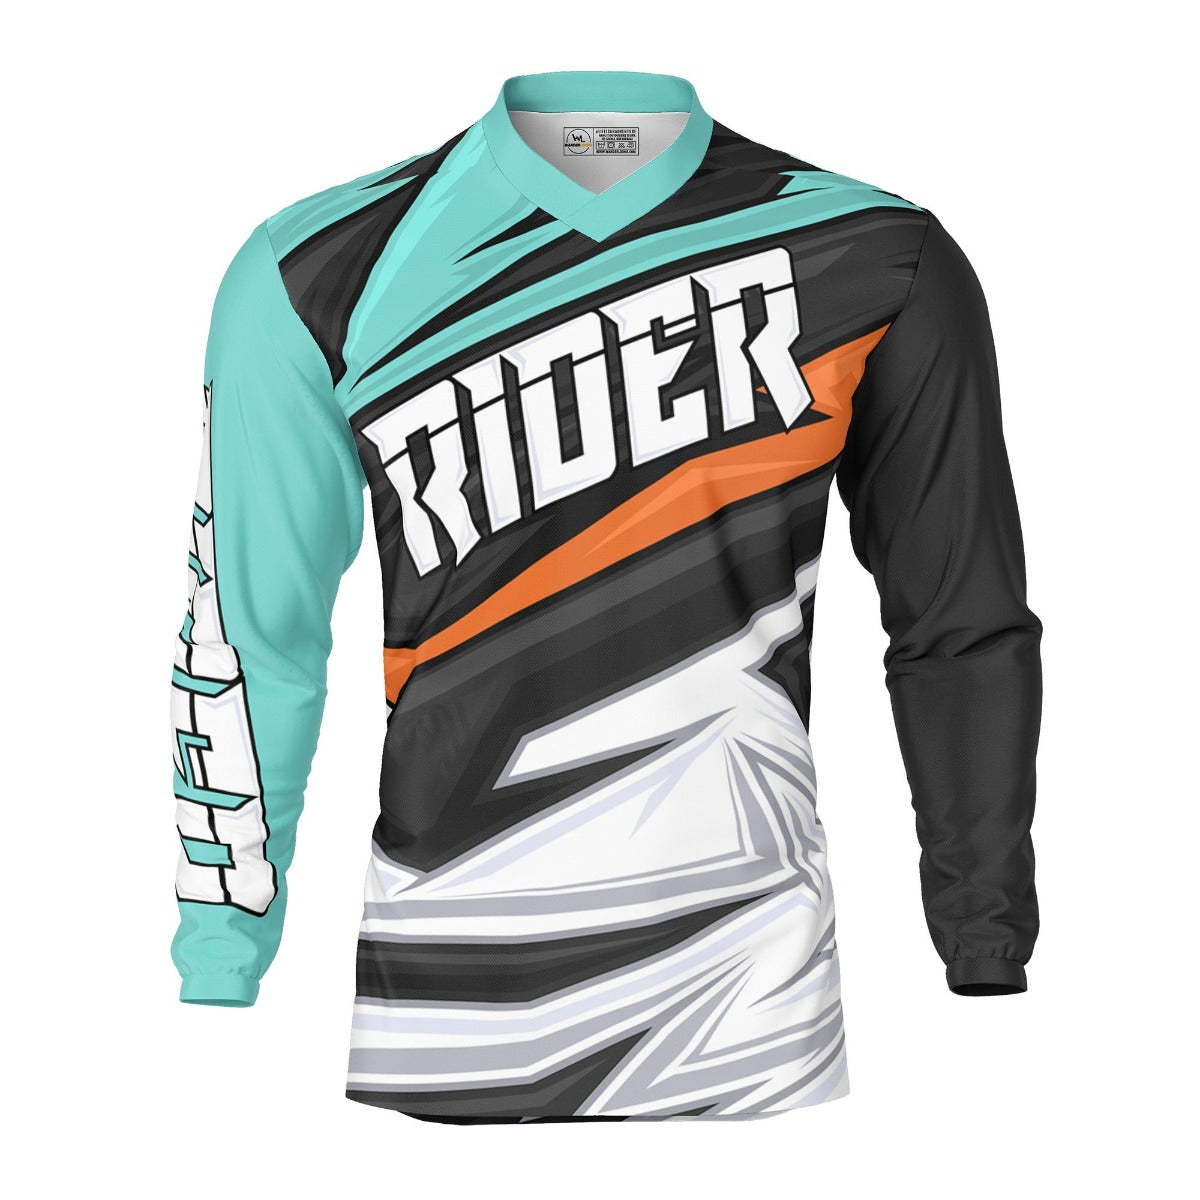 Absolute Rider Jersey 1